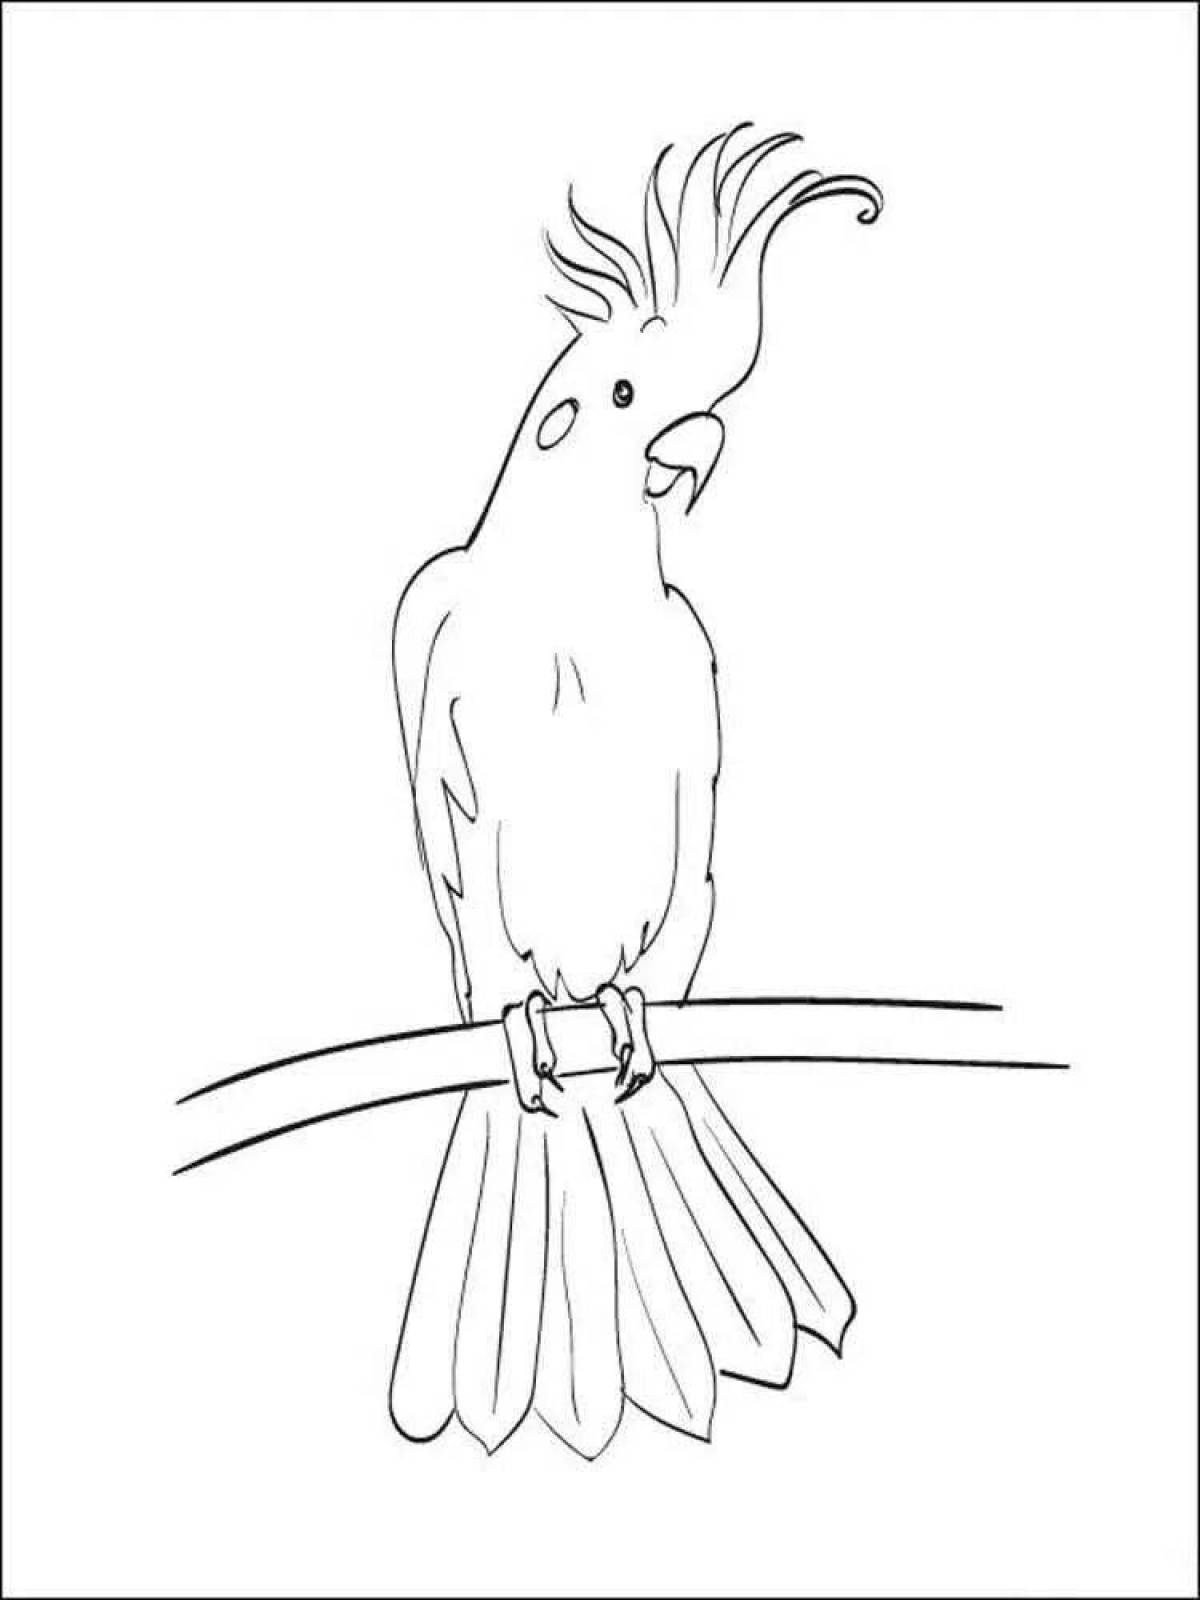 Fabulous cockatoo coloring page